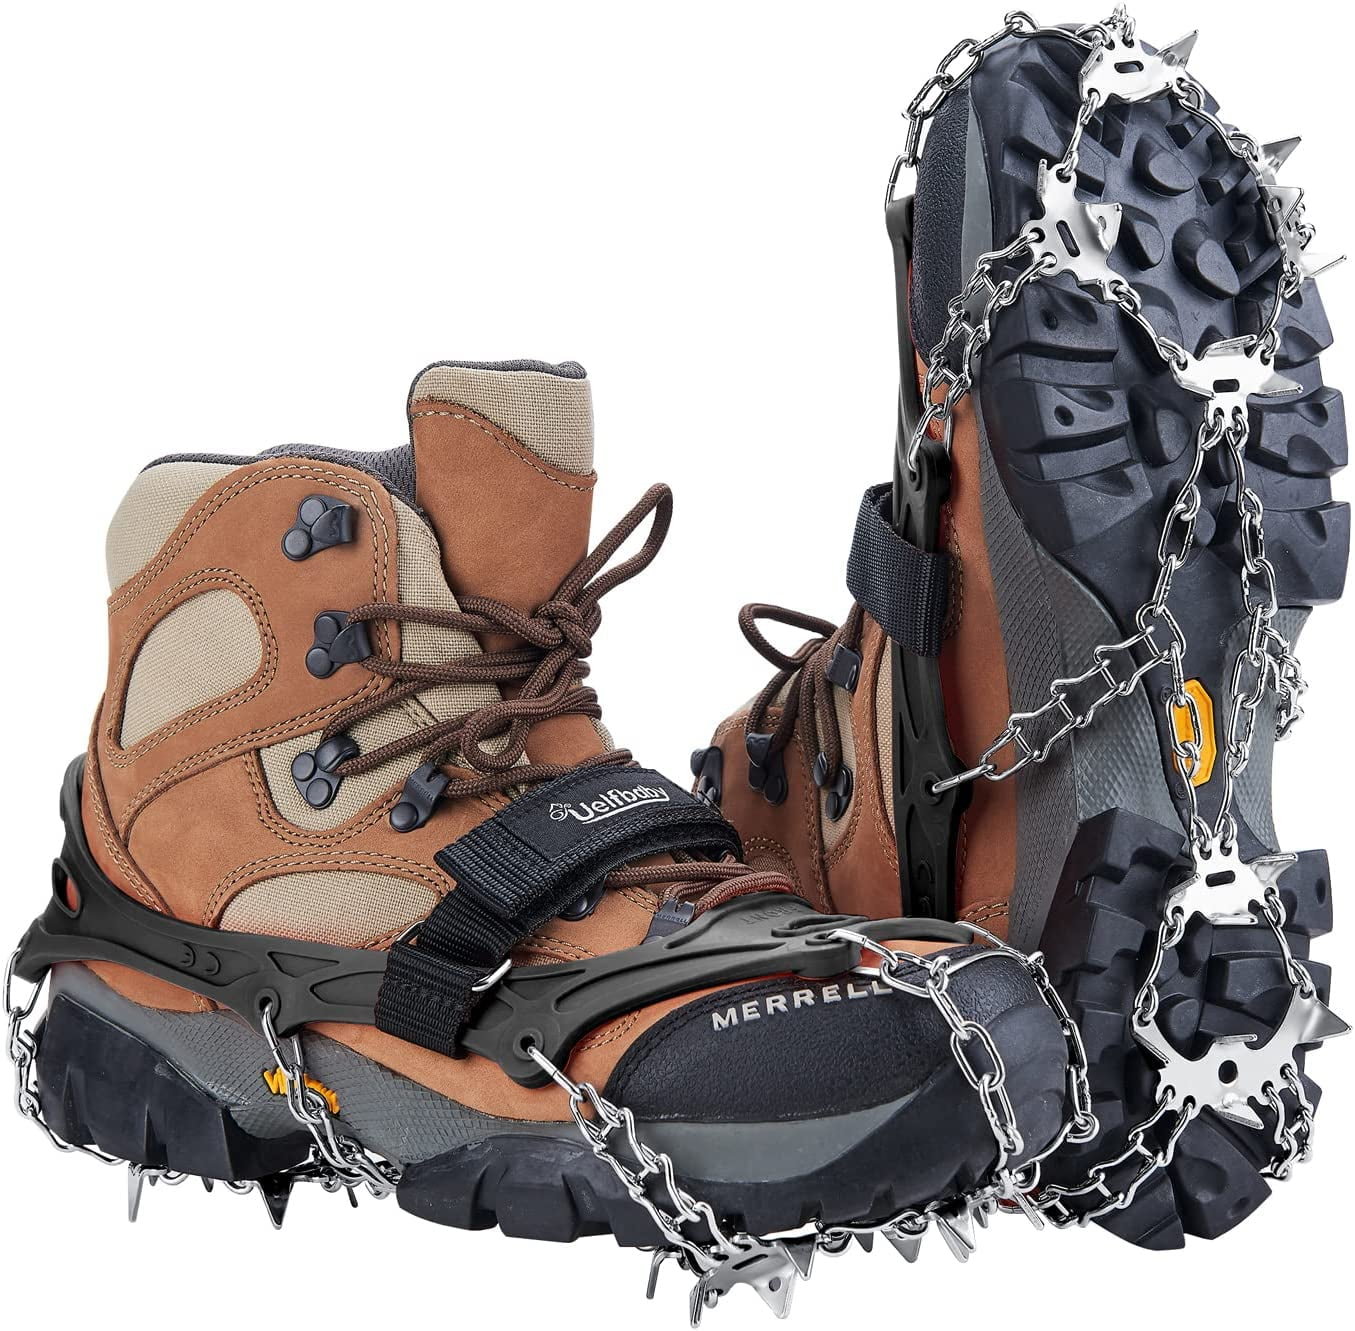 Crampons for Hiking BootsTraction Cleats Ice Snow Grips with 19 ...